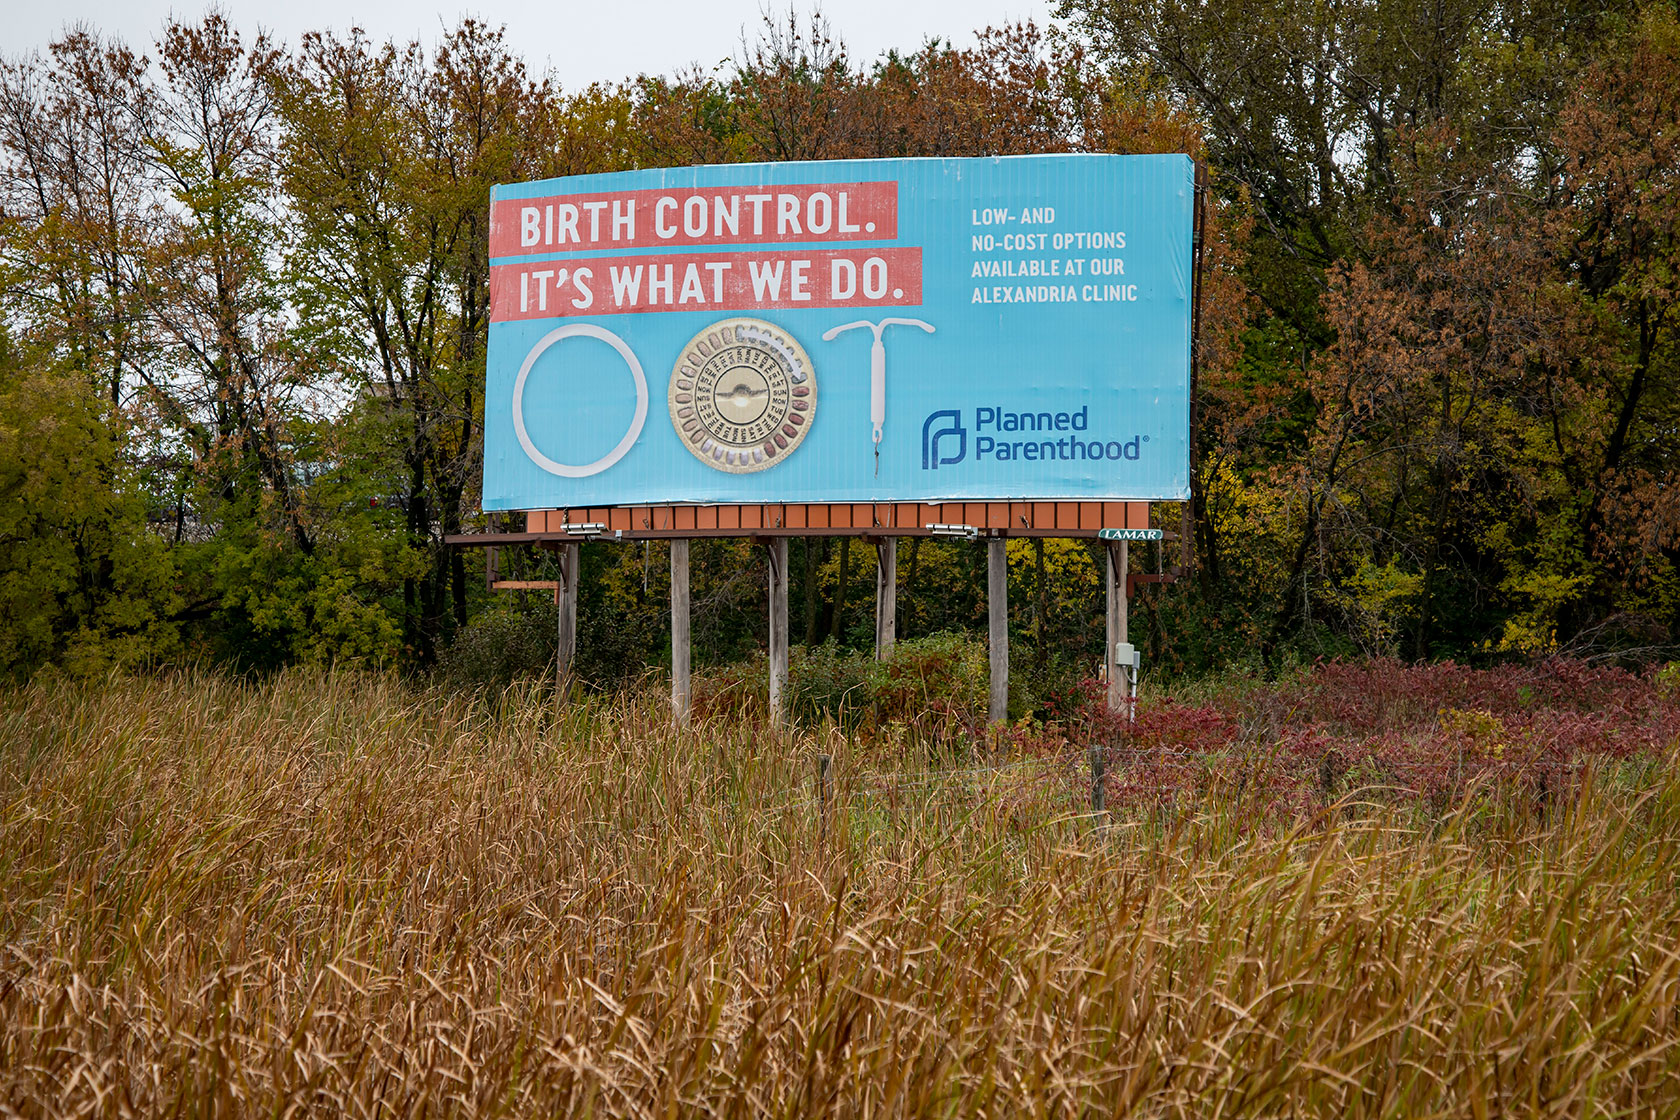 Planned Parenthood birth control sign.